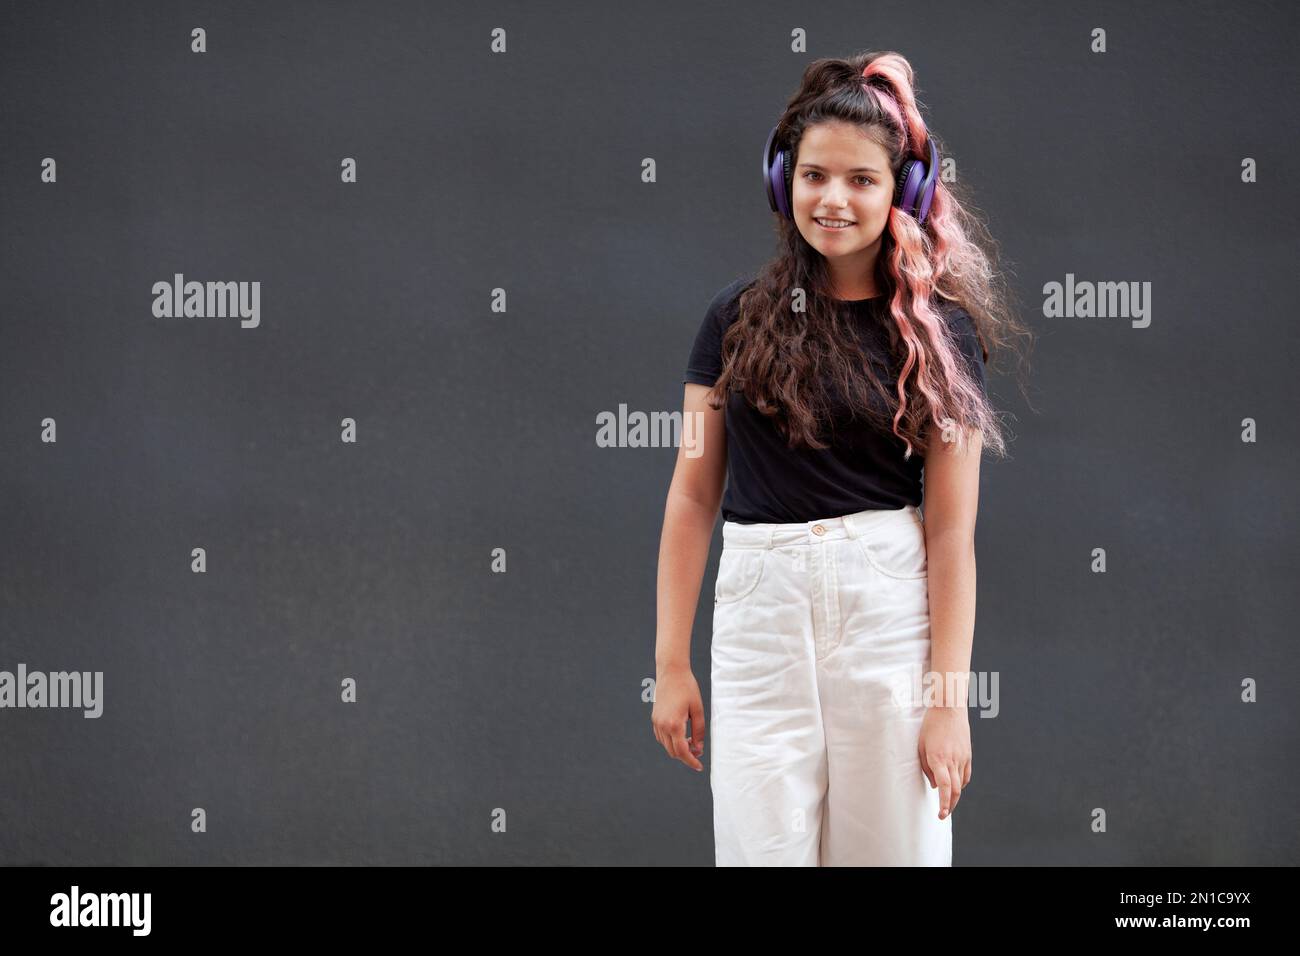 Young happy Girl with colored long pink hair listen to music with headphones, smiling and looking at camera isolated on dark gray background Stock Photo